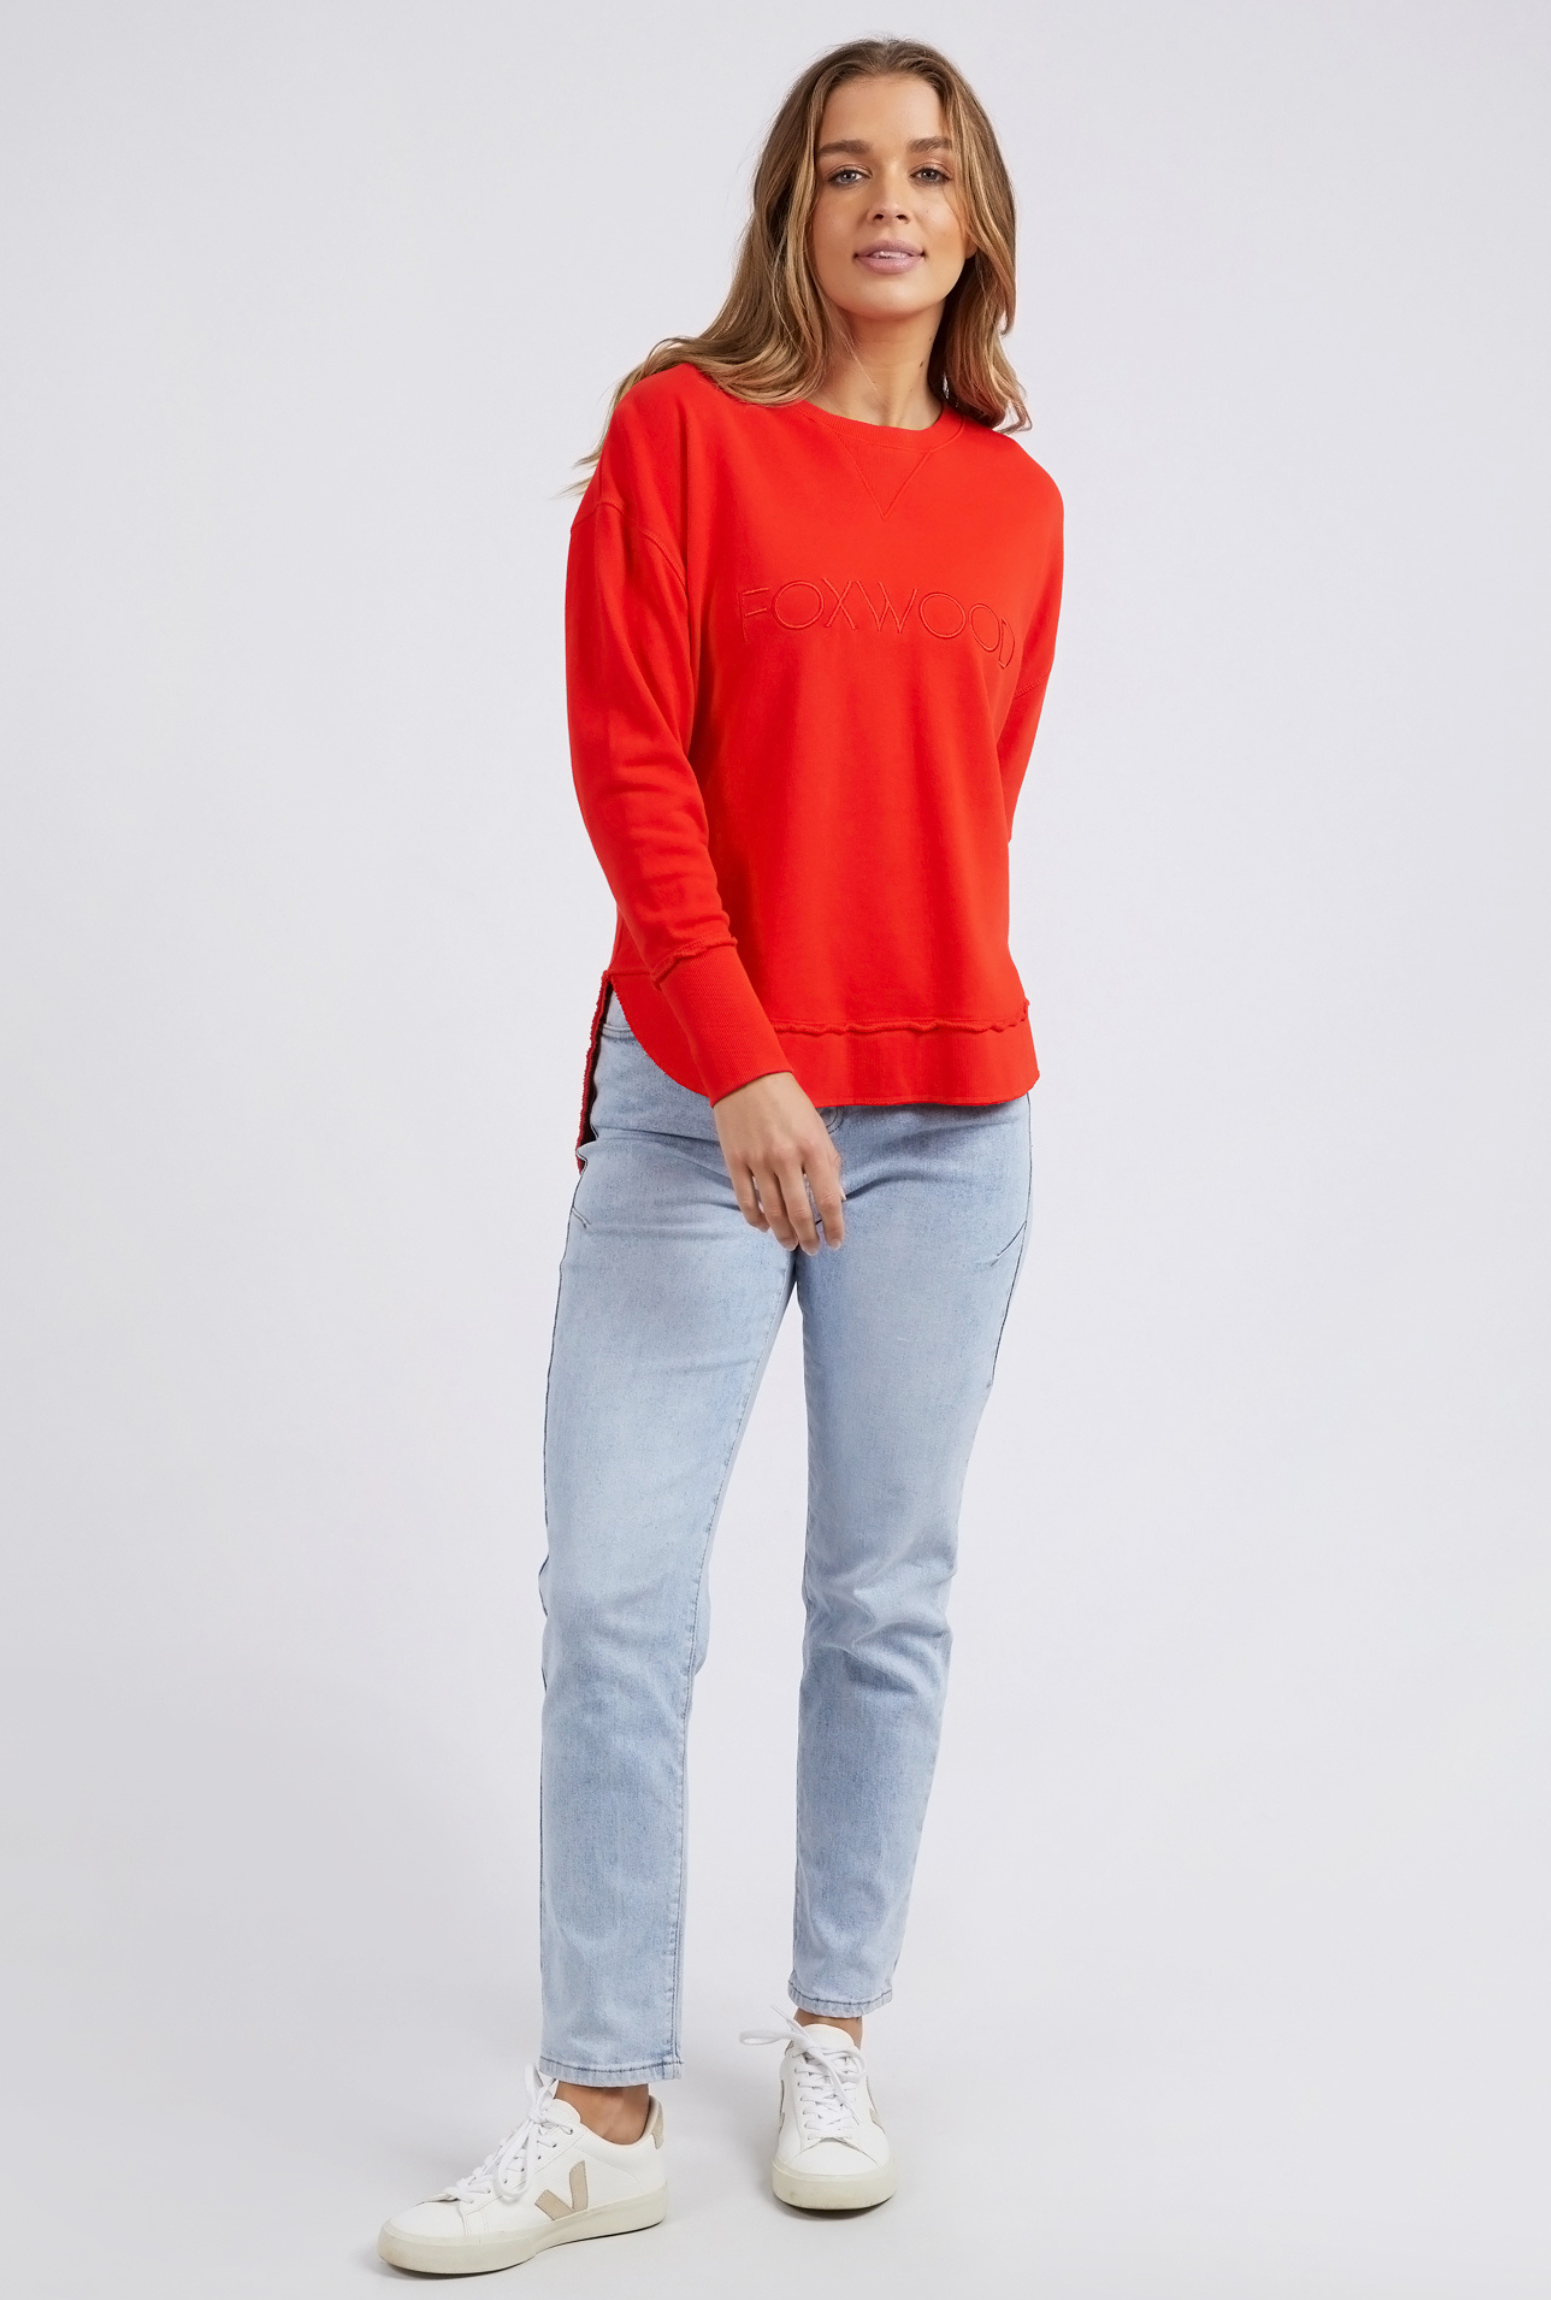 Foxwood Simplified Crew - Bright Red